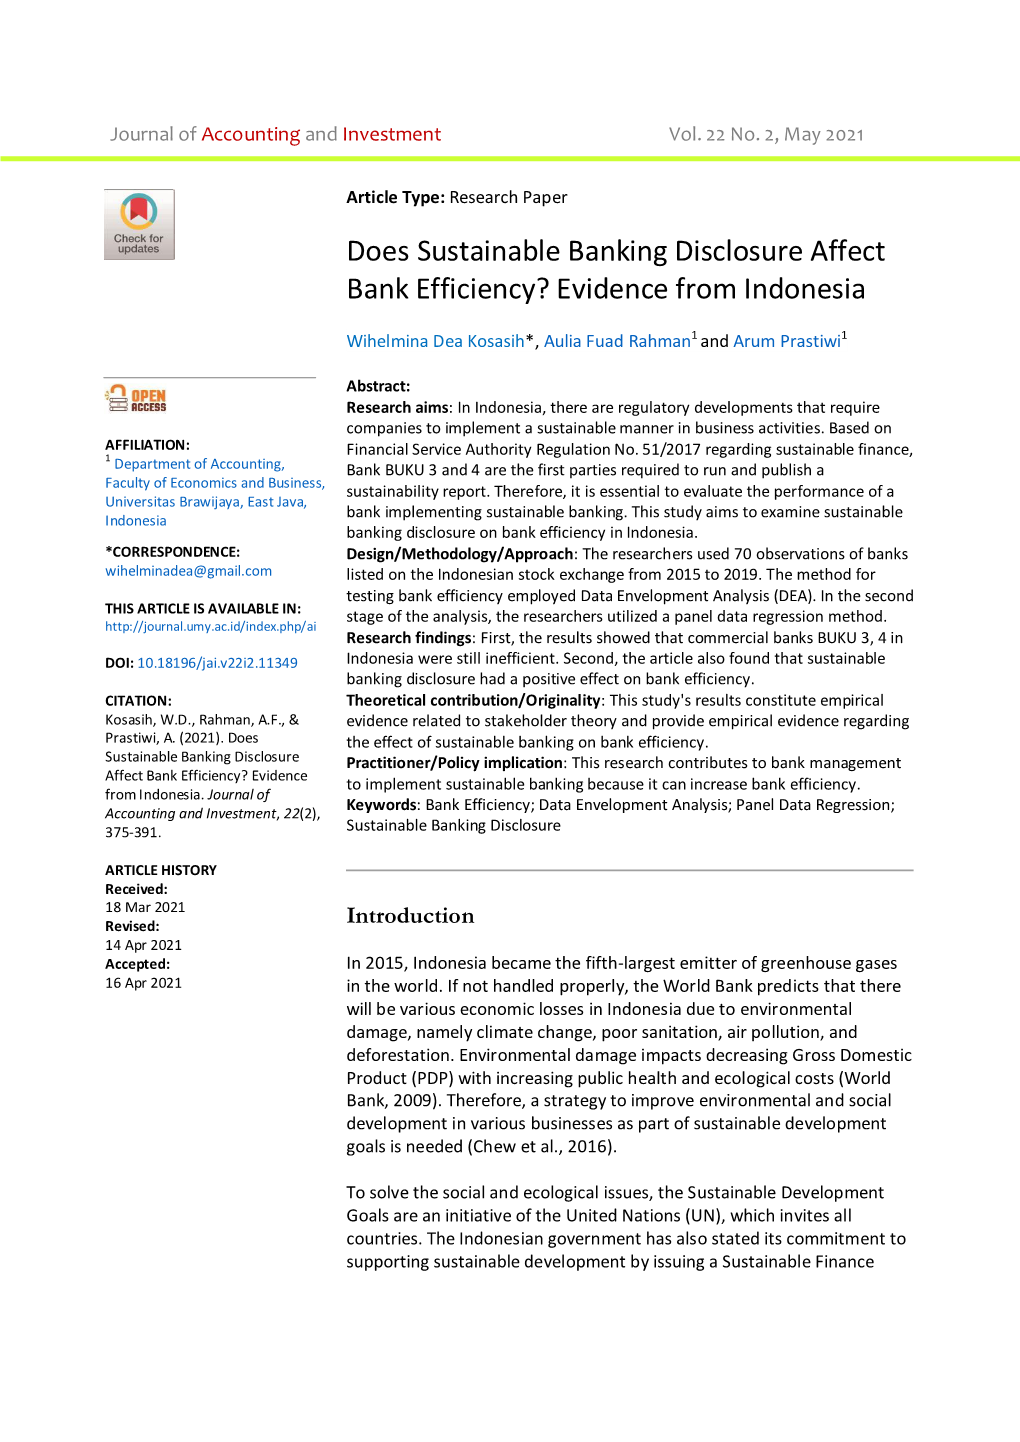 Does Sustainable Banking Disclosure Affect Bank Efficiency? Evidence from Indonesia